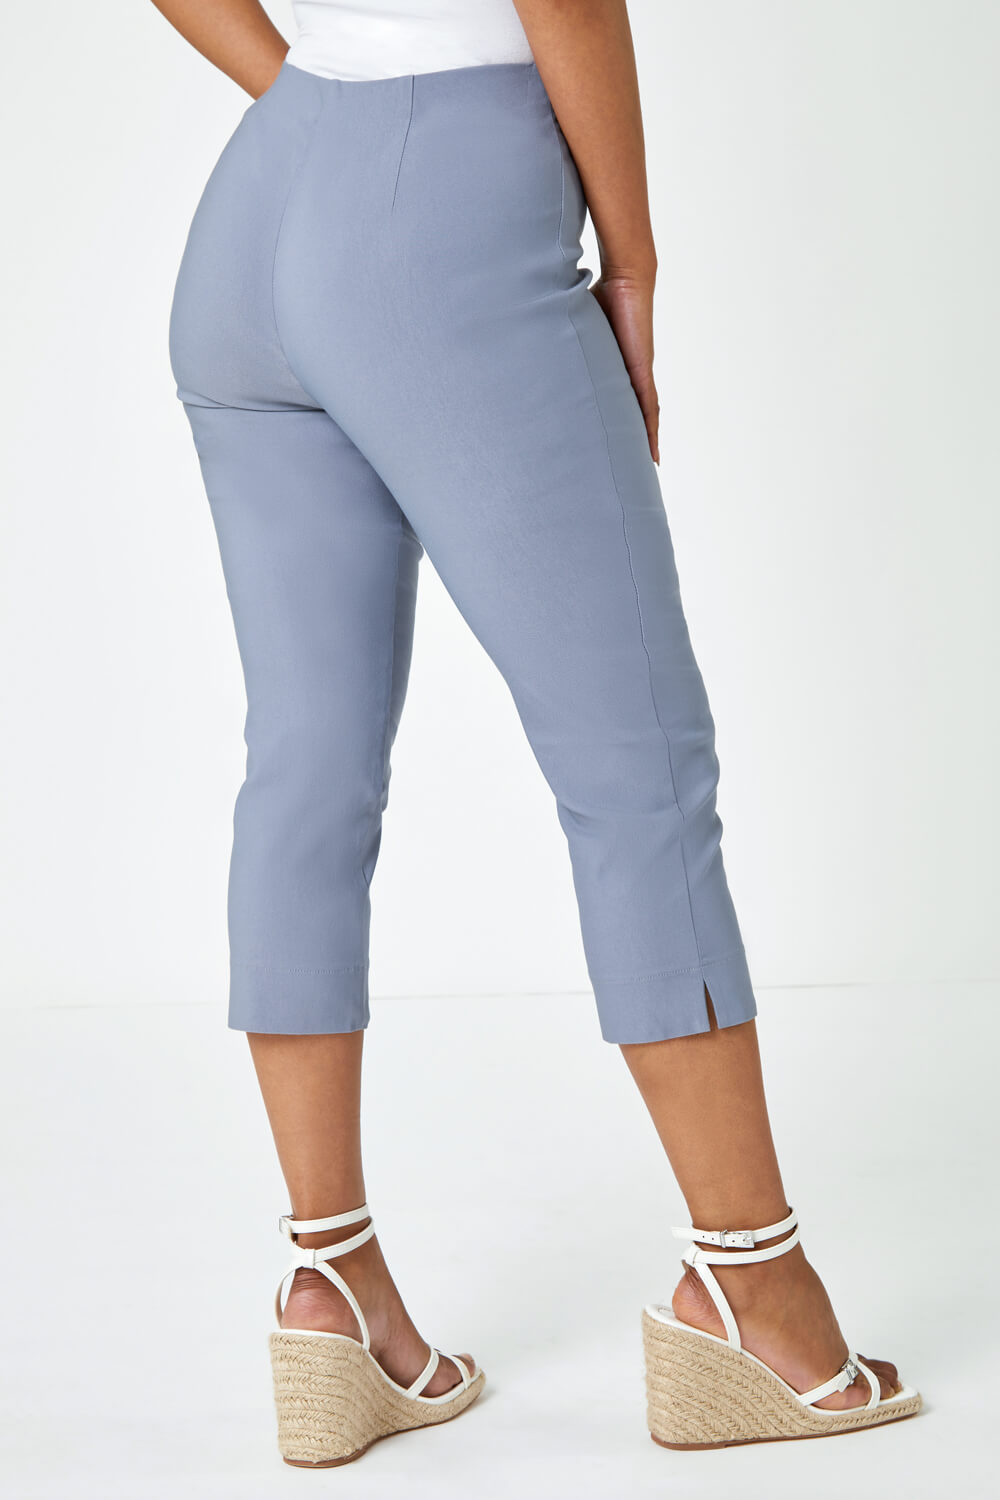 Light Grey Petite Cropped Stretch Trouser, Image 3 of 5